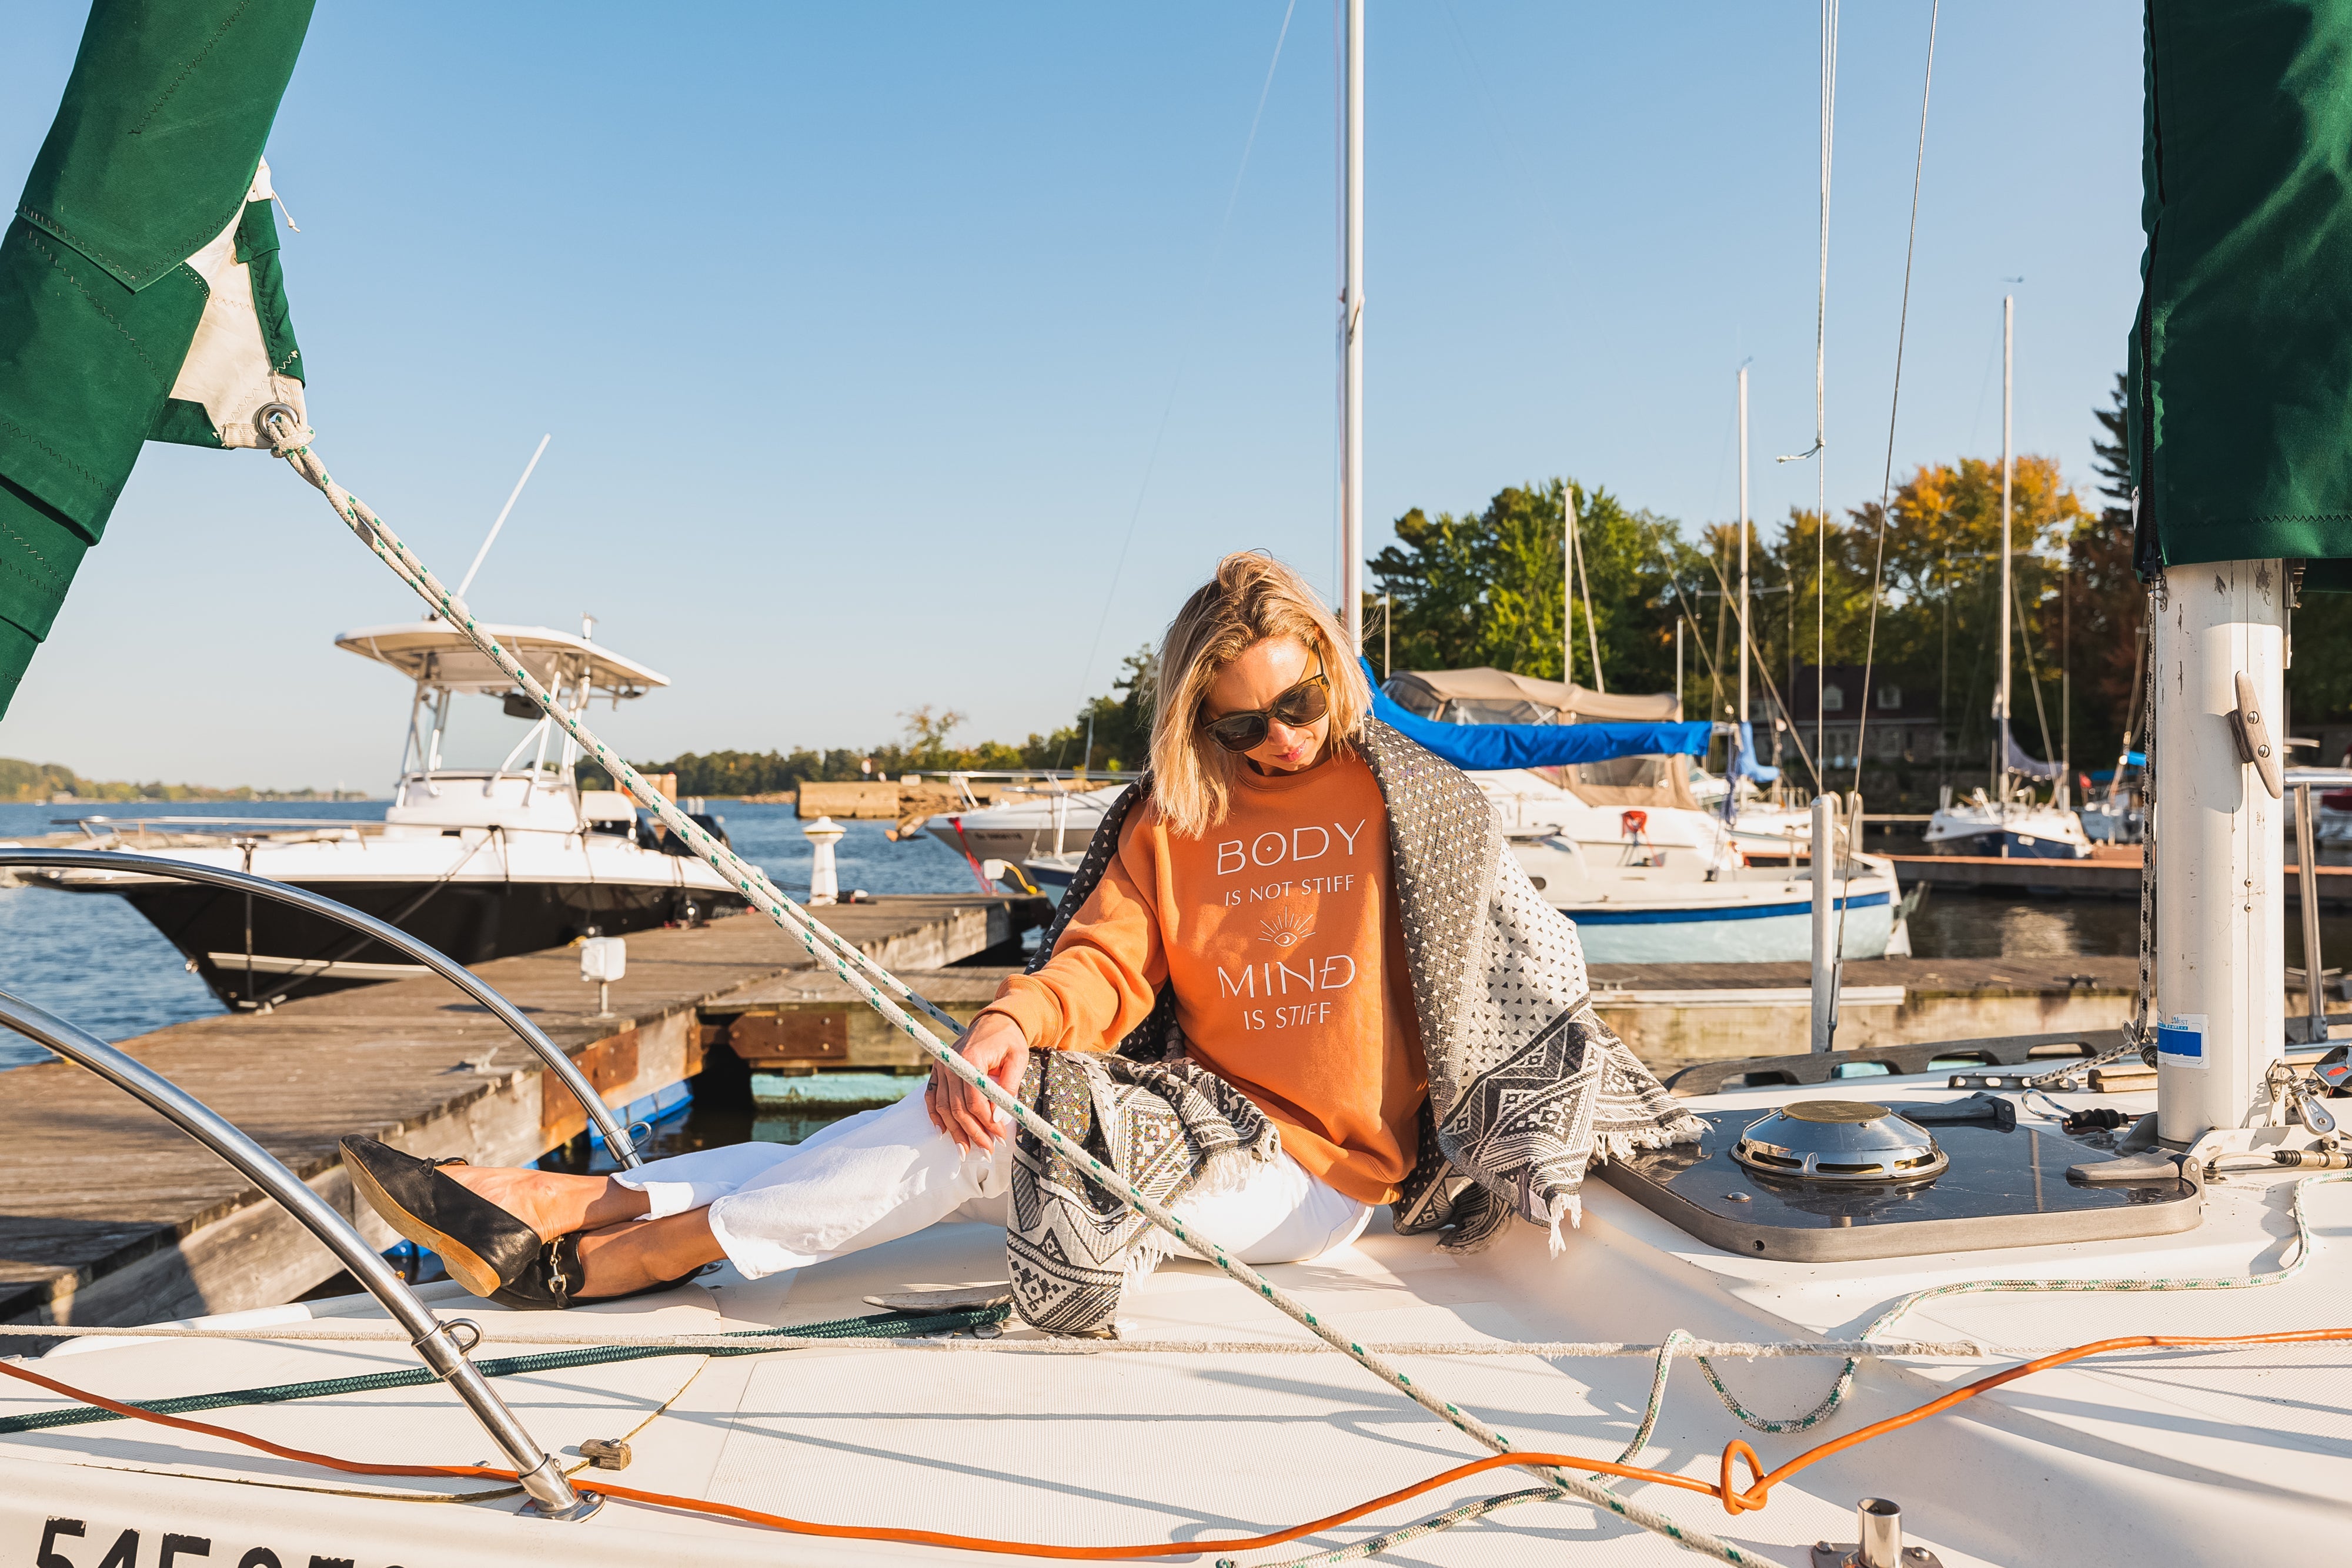 Woman on a sail boat wearing a bright orange sweater, white pants and sunglasses.